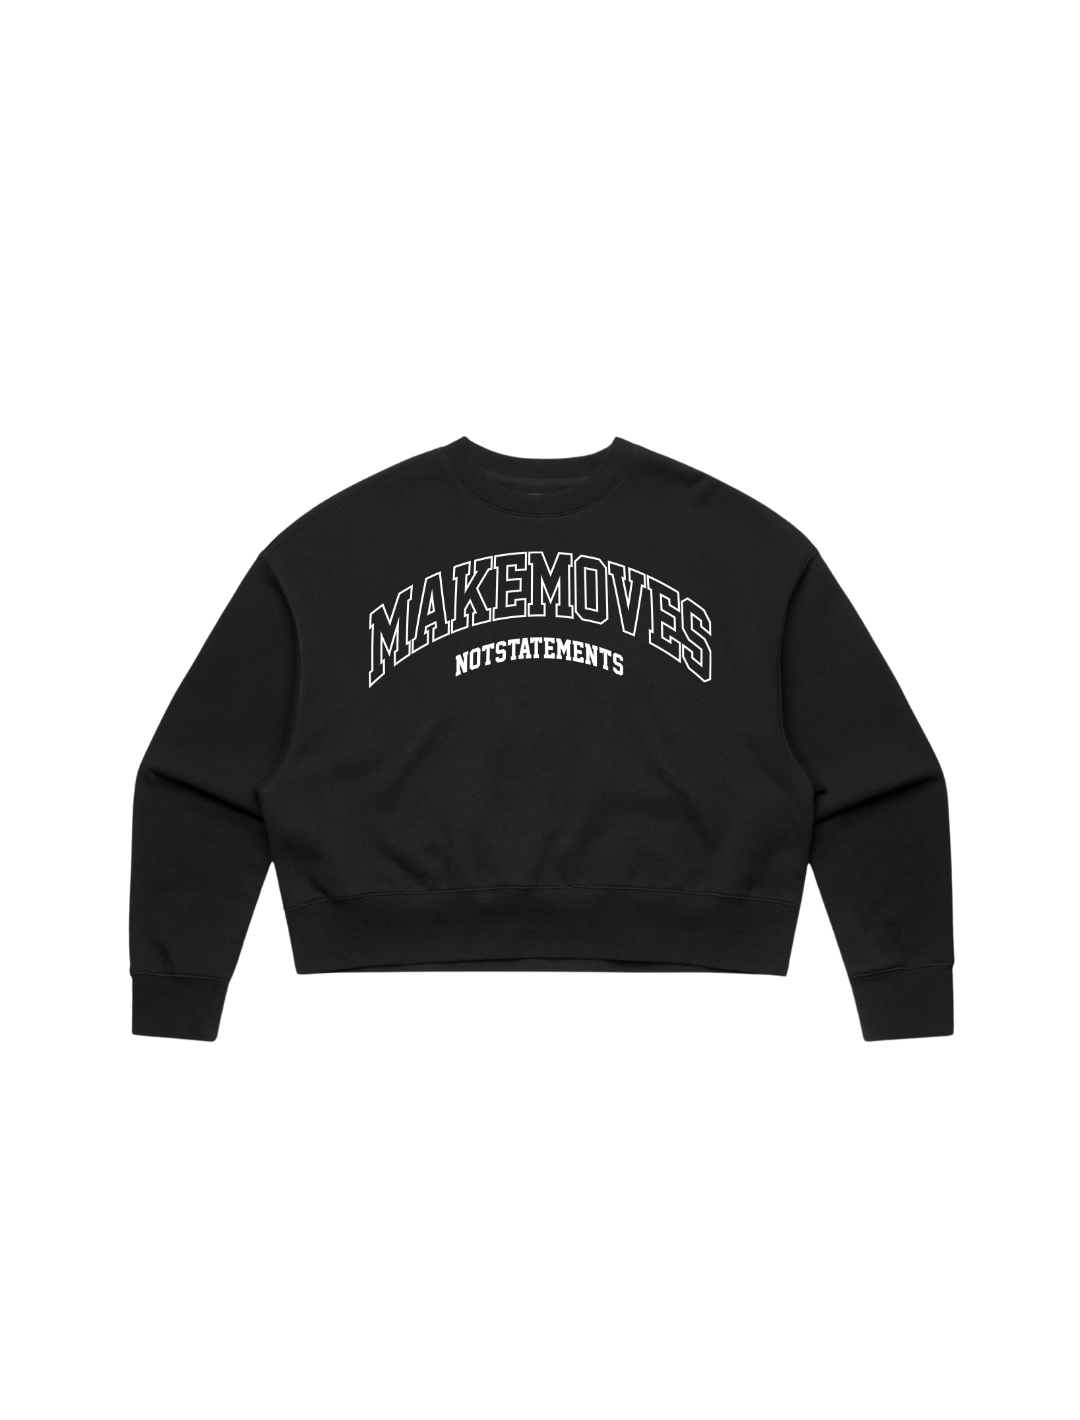 The Make Moves Not Statements long sleeve sport crop top is 100% cotton, french terry. The crop top features a large MMNS logo  across  the front in white outlined font.  